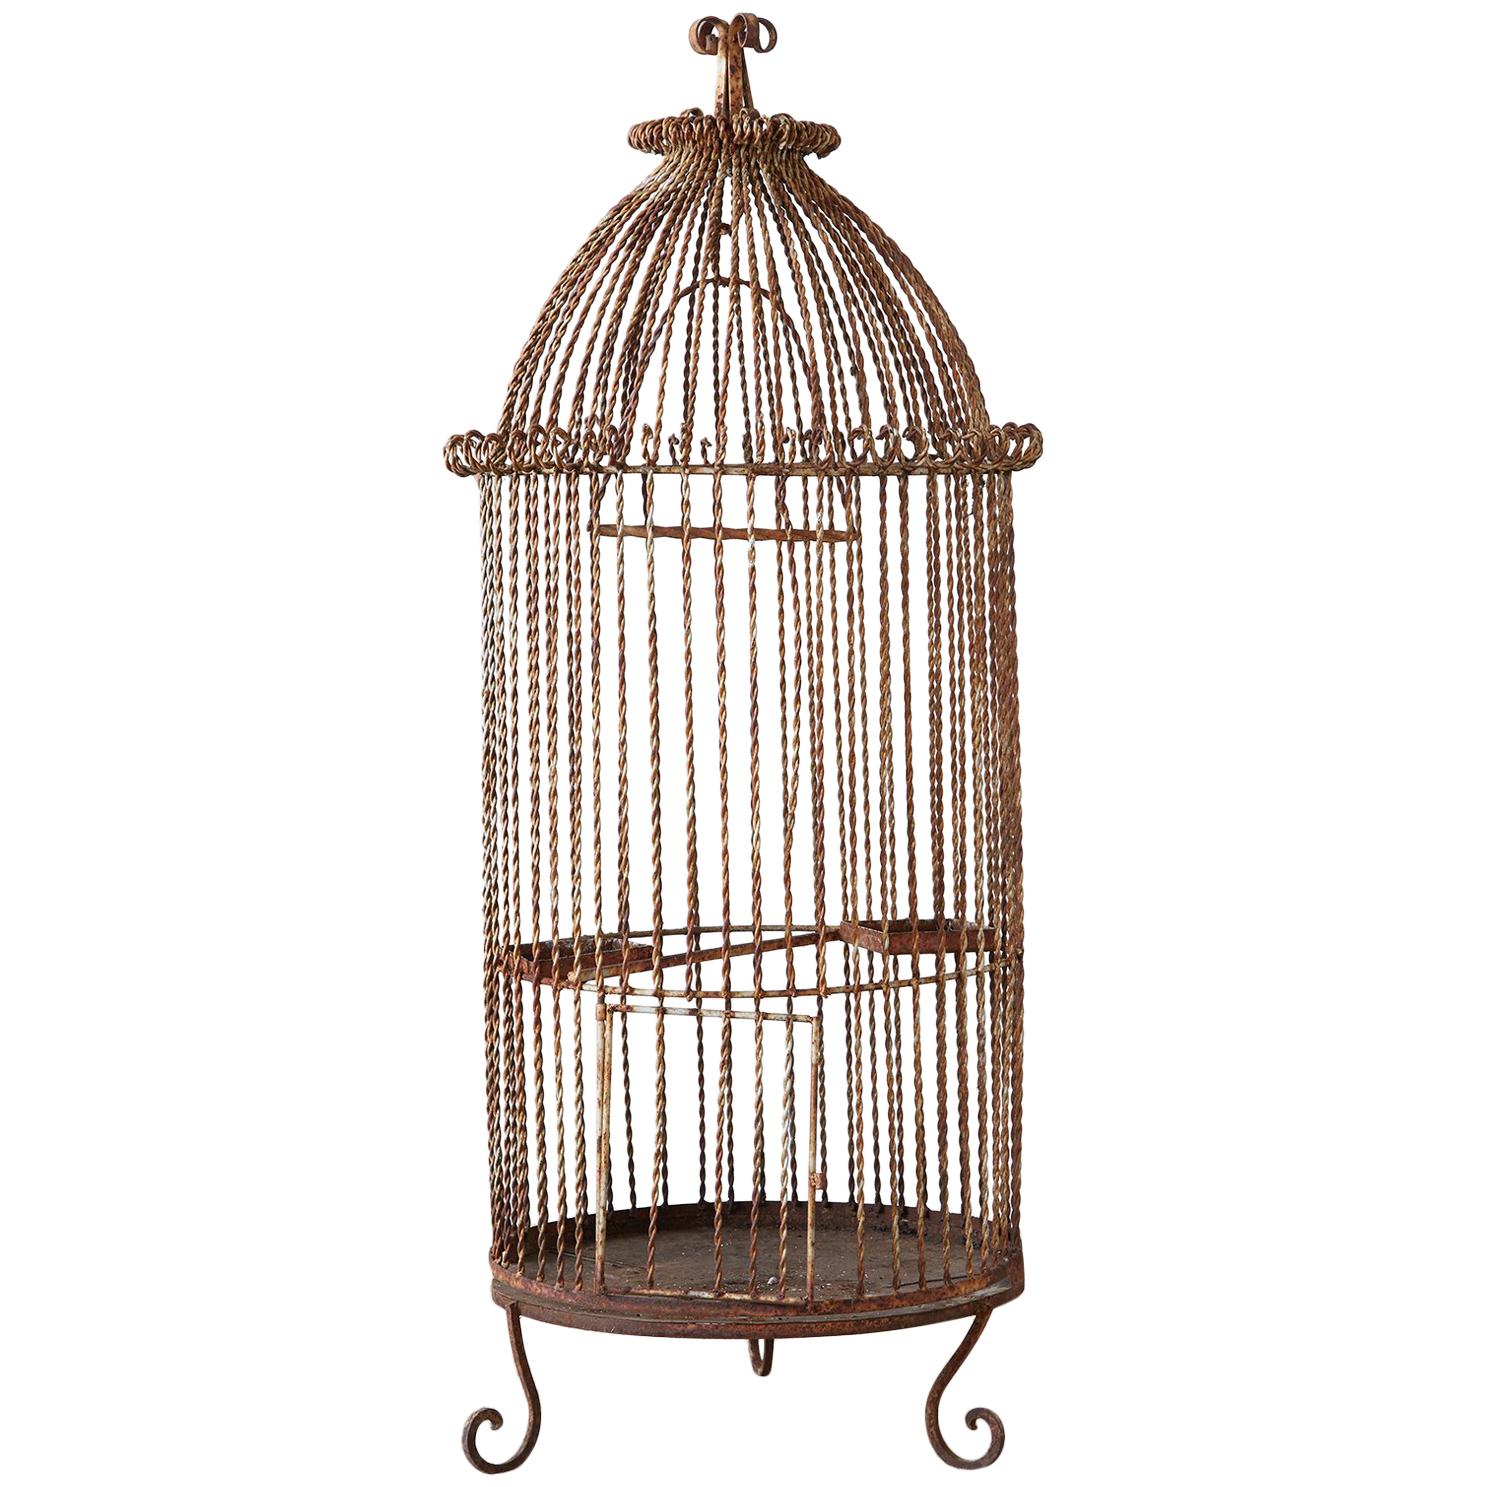 Rustic French standing bird cage made of wrought iron and thick twisted wire. The round form has a domed top with scrolls. There is a large swinging perch inside and large door. The cage is supported three scrolled legs and the piece has a lovely